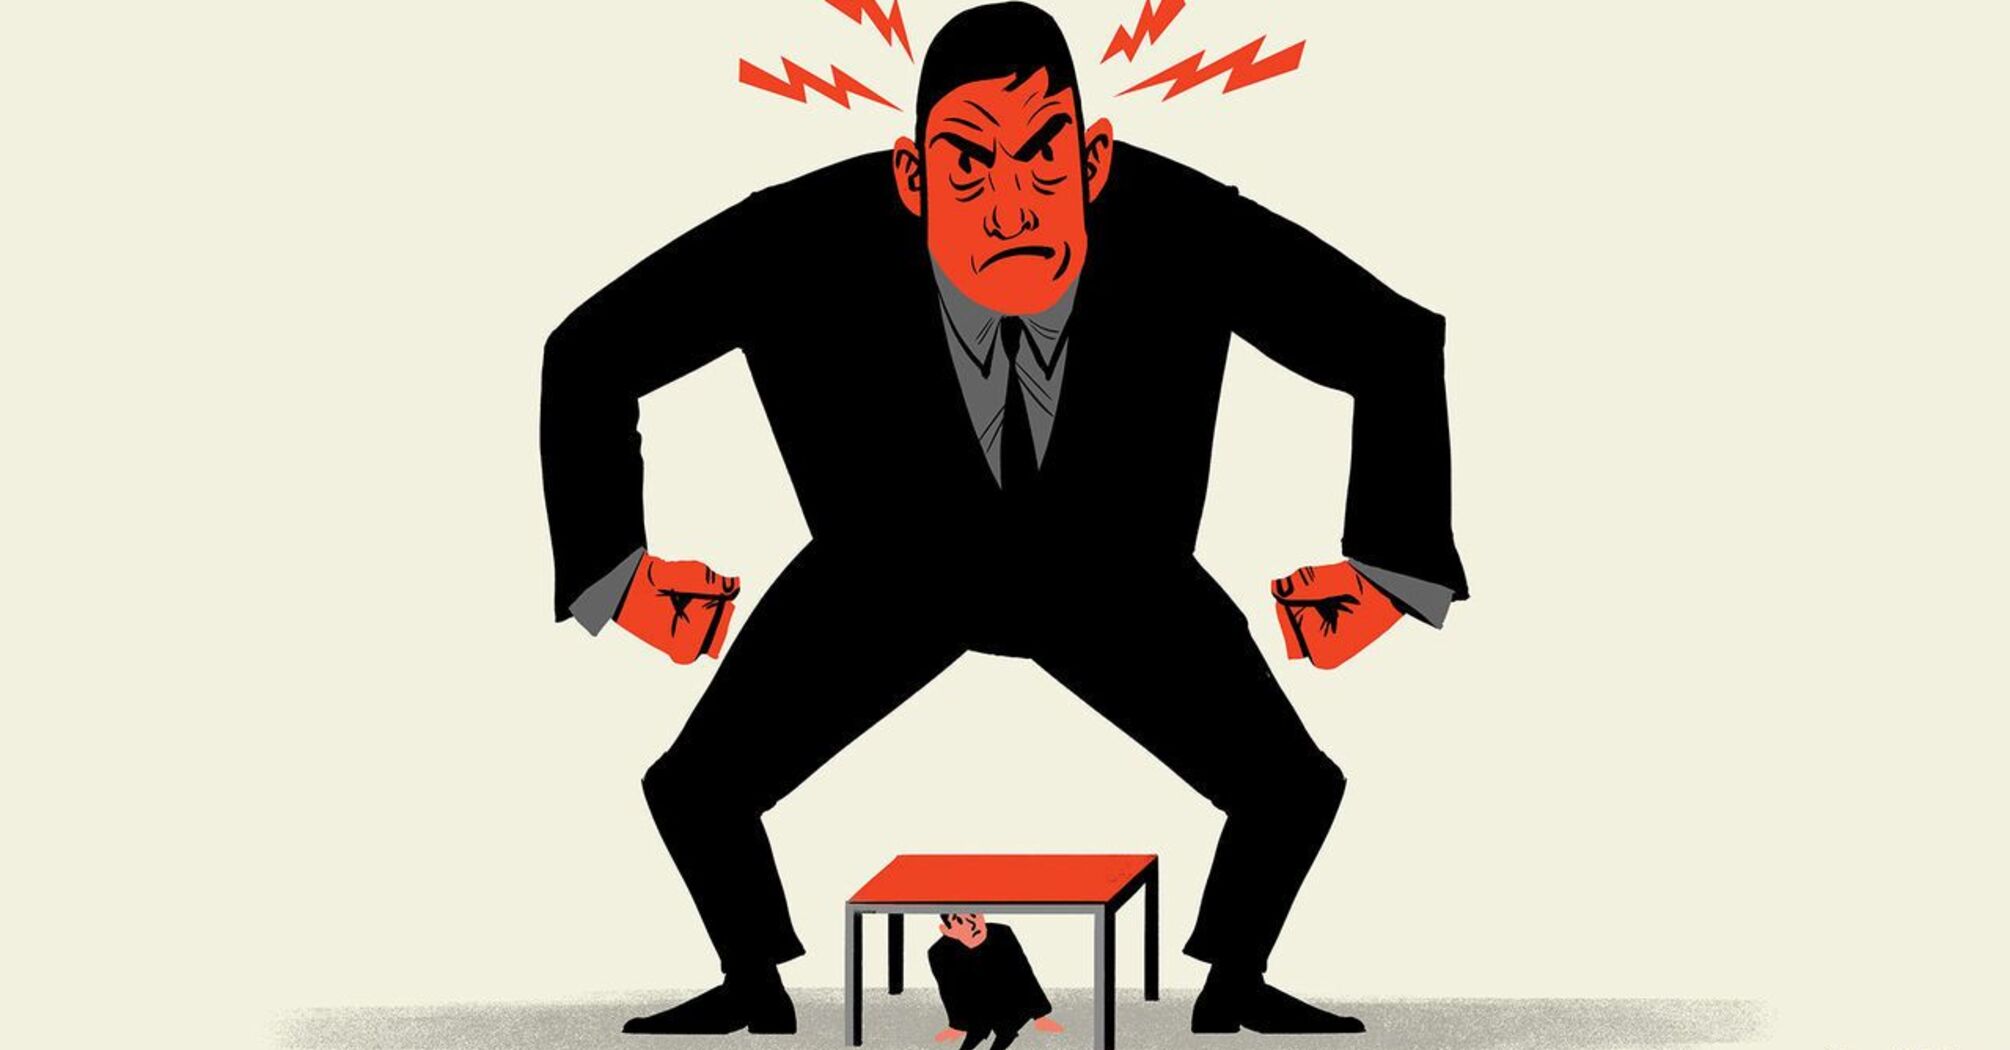 Tips for dealing with a narcissistic boss